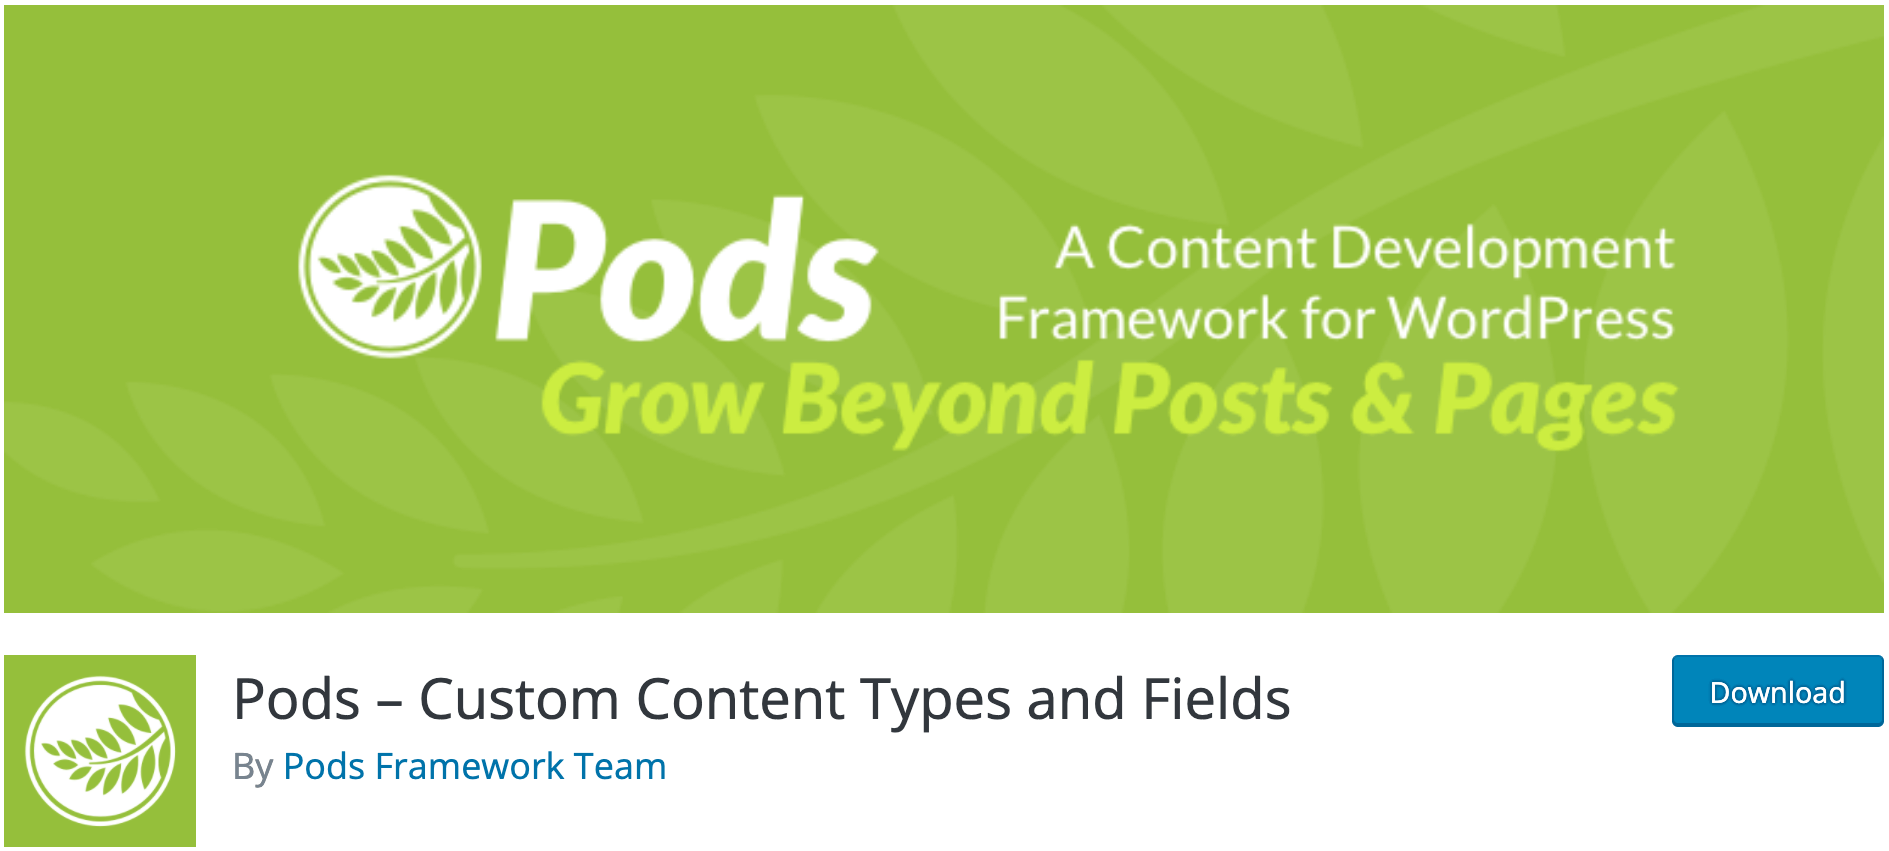 Custom Content Types and Fields